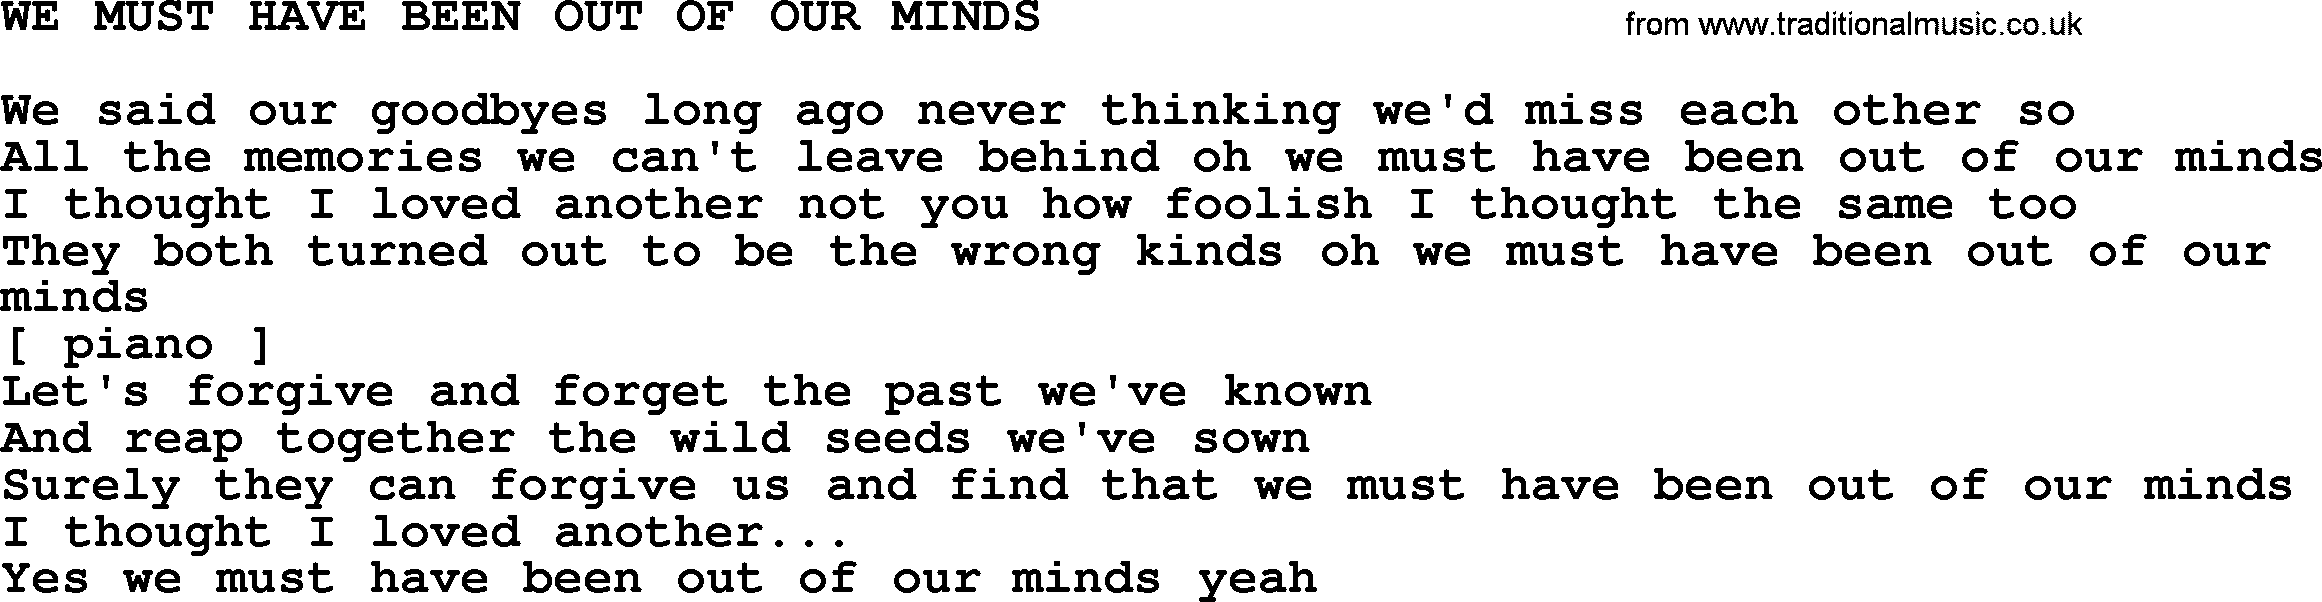 Kris Kristofferson song: We Must Have Been Out Of Our Minds lyrics